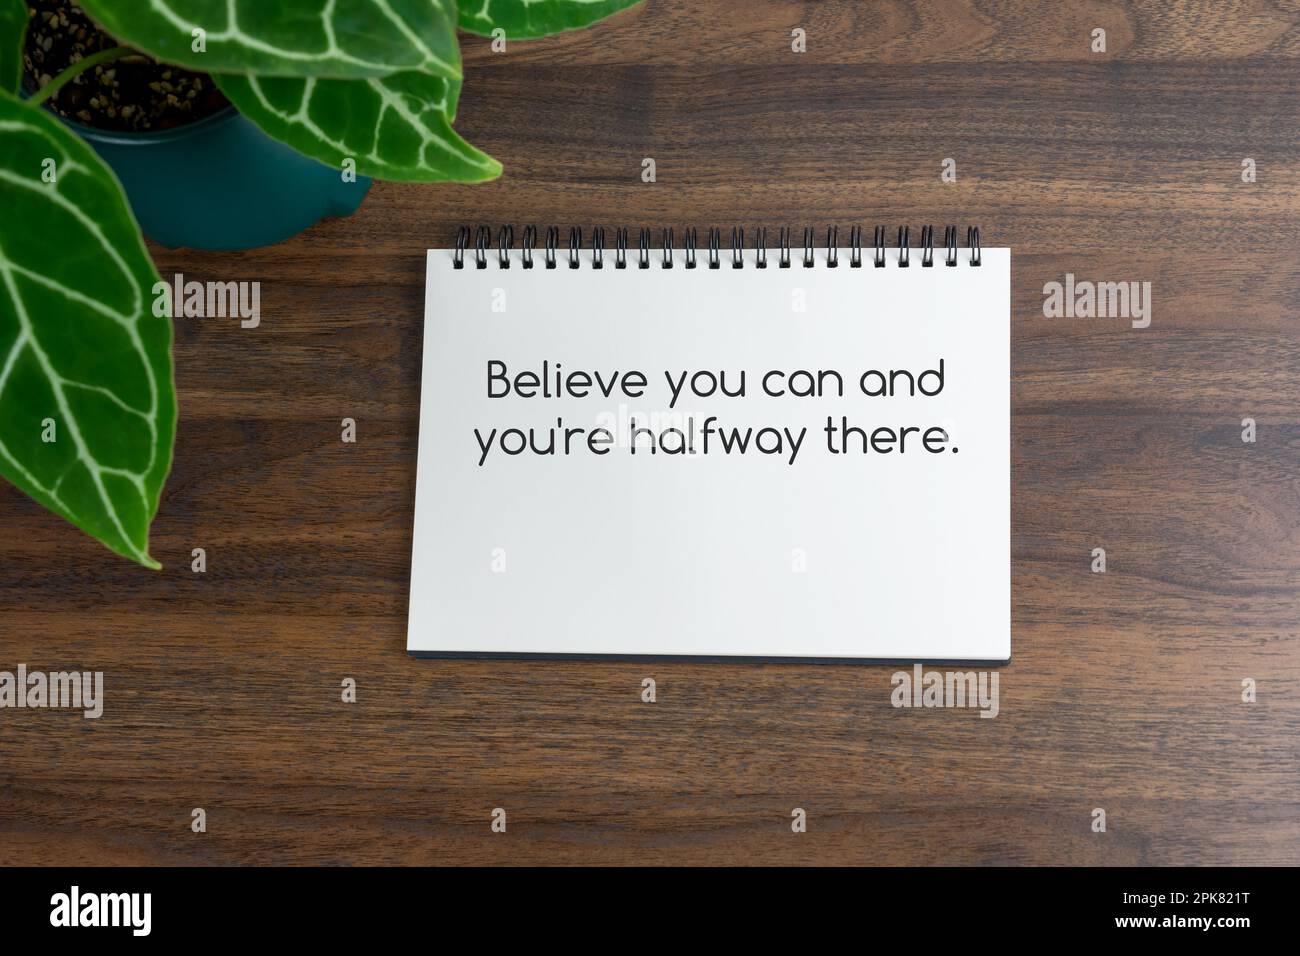 Short inspirational quotes text on note pad - Believe you can and you're halfway there. Stock Photo